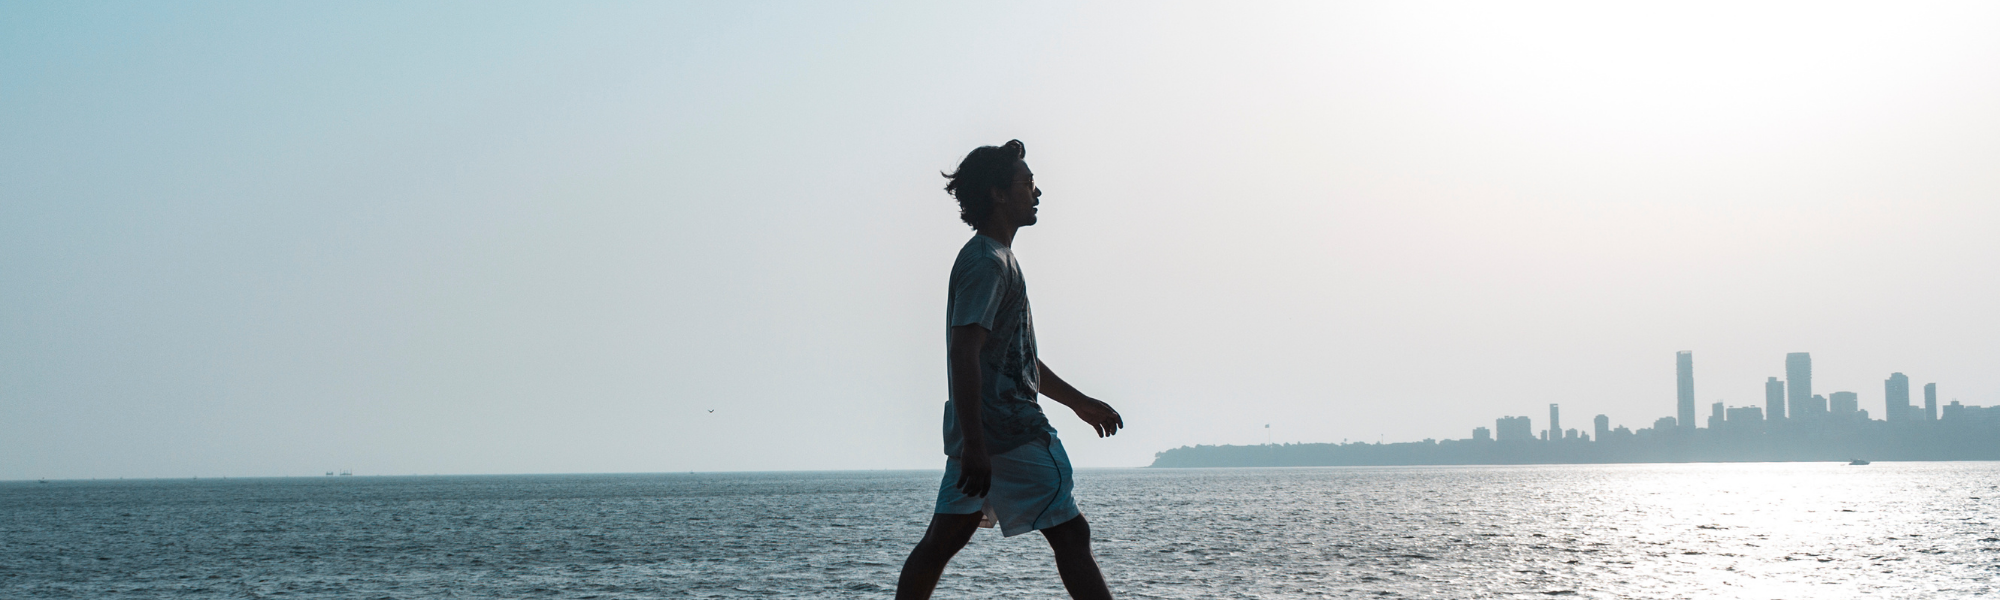 Image shows a young man walking along an ocean harbour with the city skyline in the background.  Image courtesy of Canva